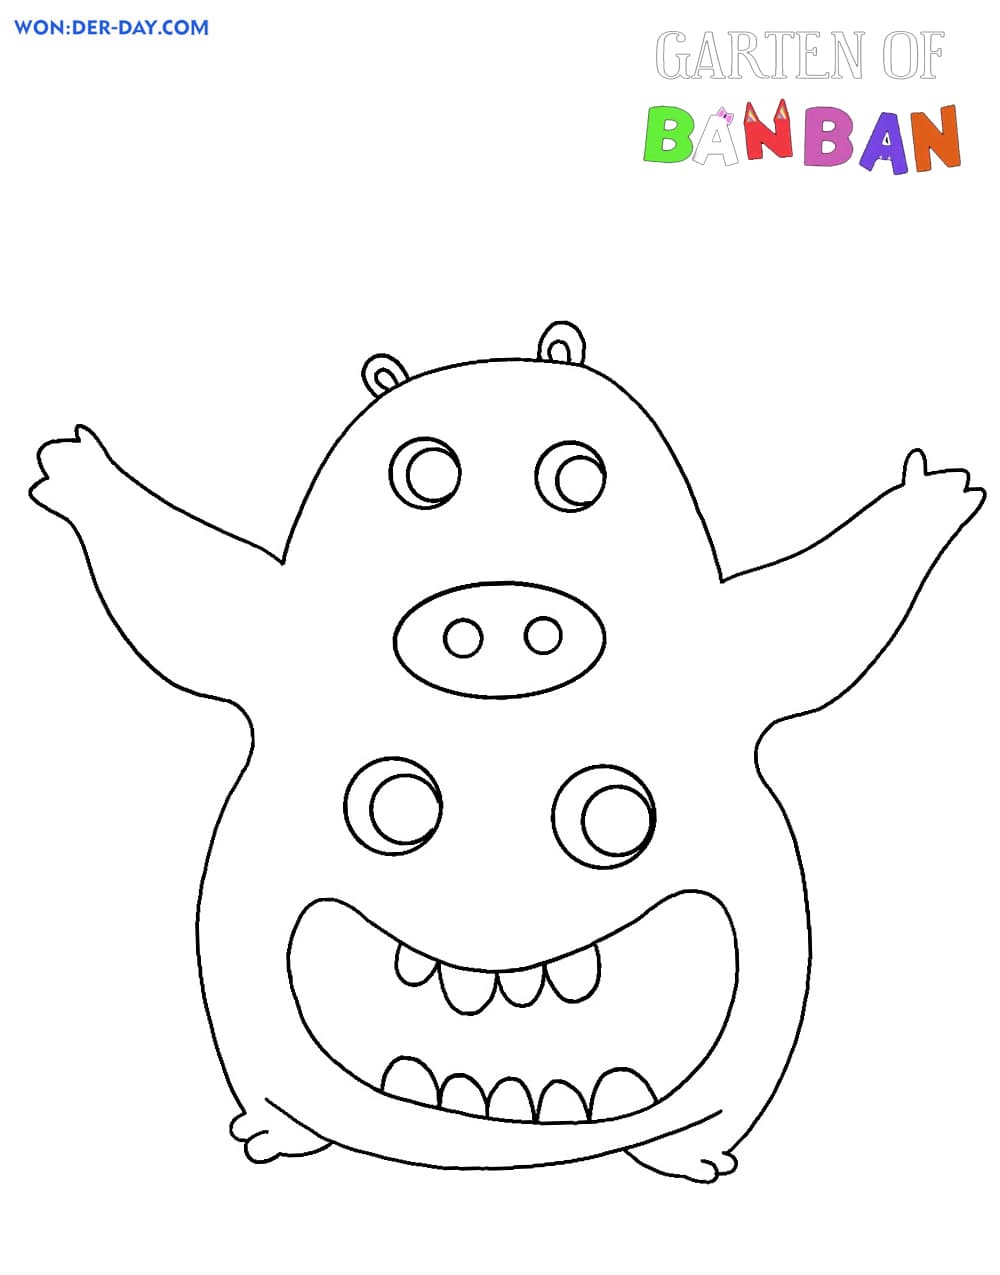 Garten of Banban Coloring Pages  WONDER DAY — Coloring pages for children  and adults